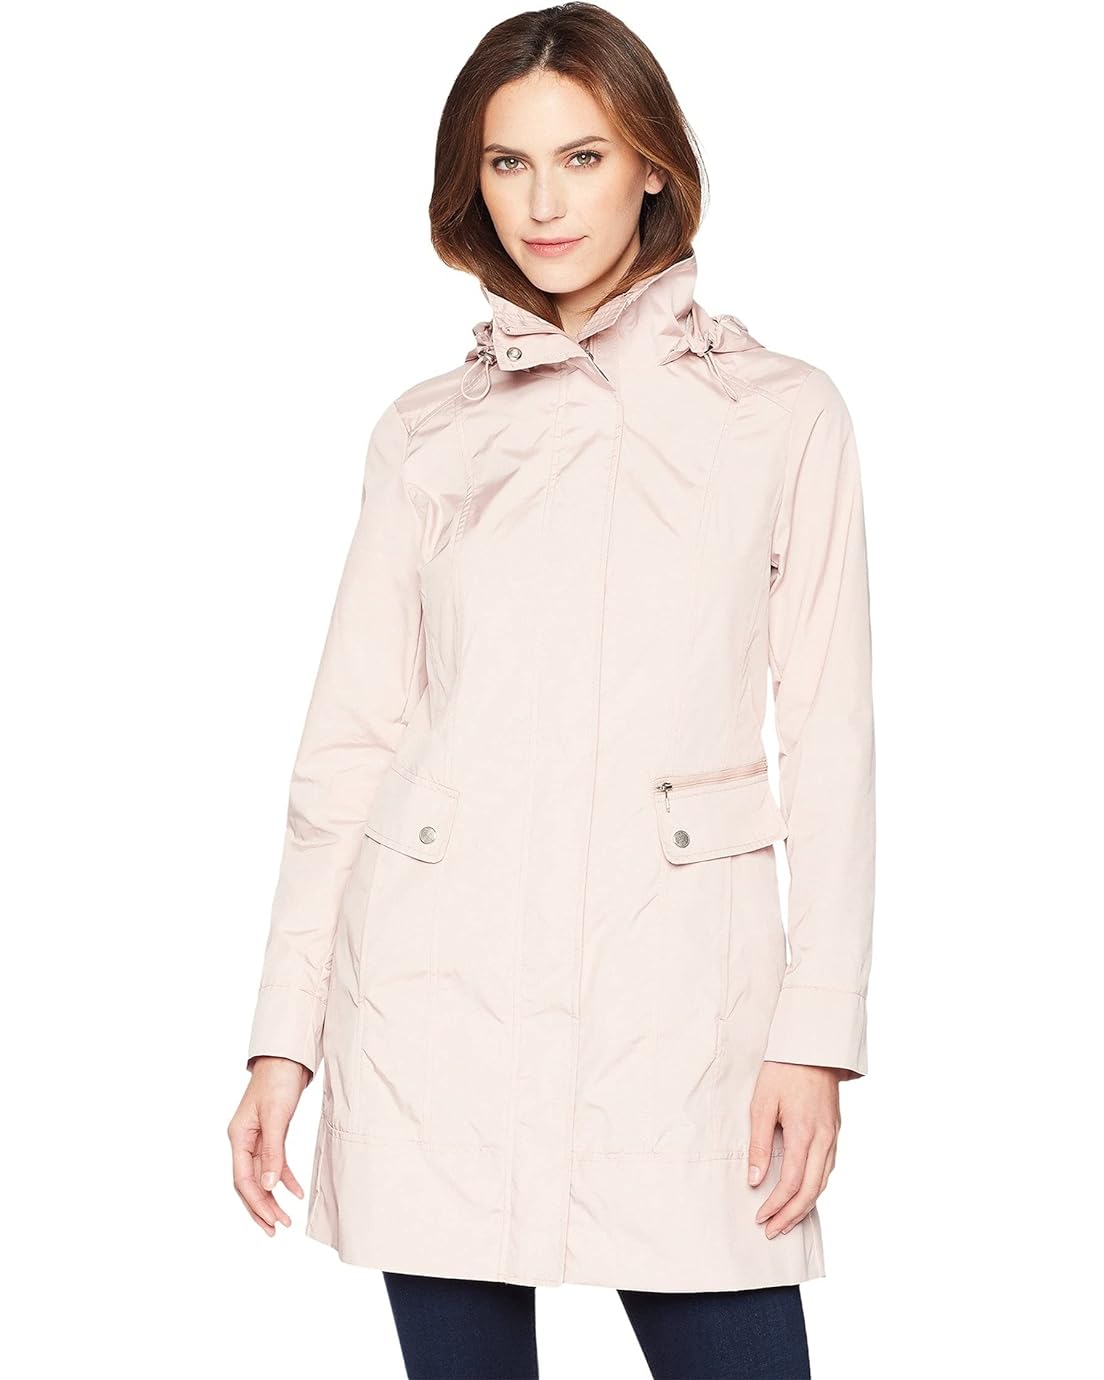 Cole Haan Womens Packable Hooded Rain Jacket with Bow